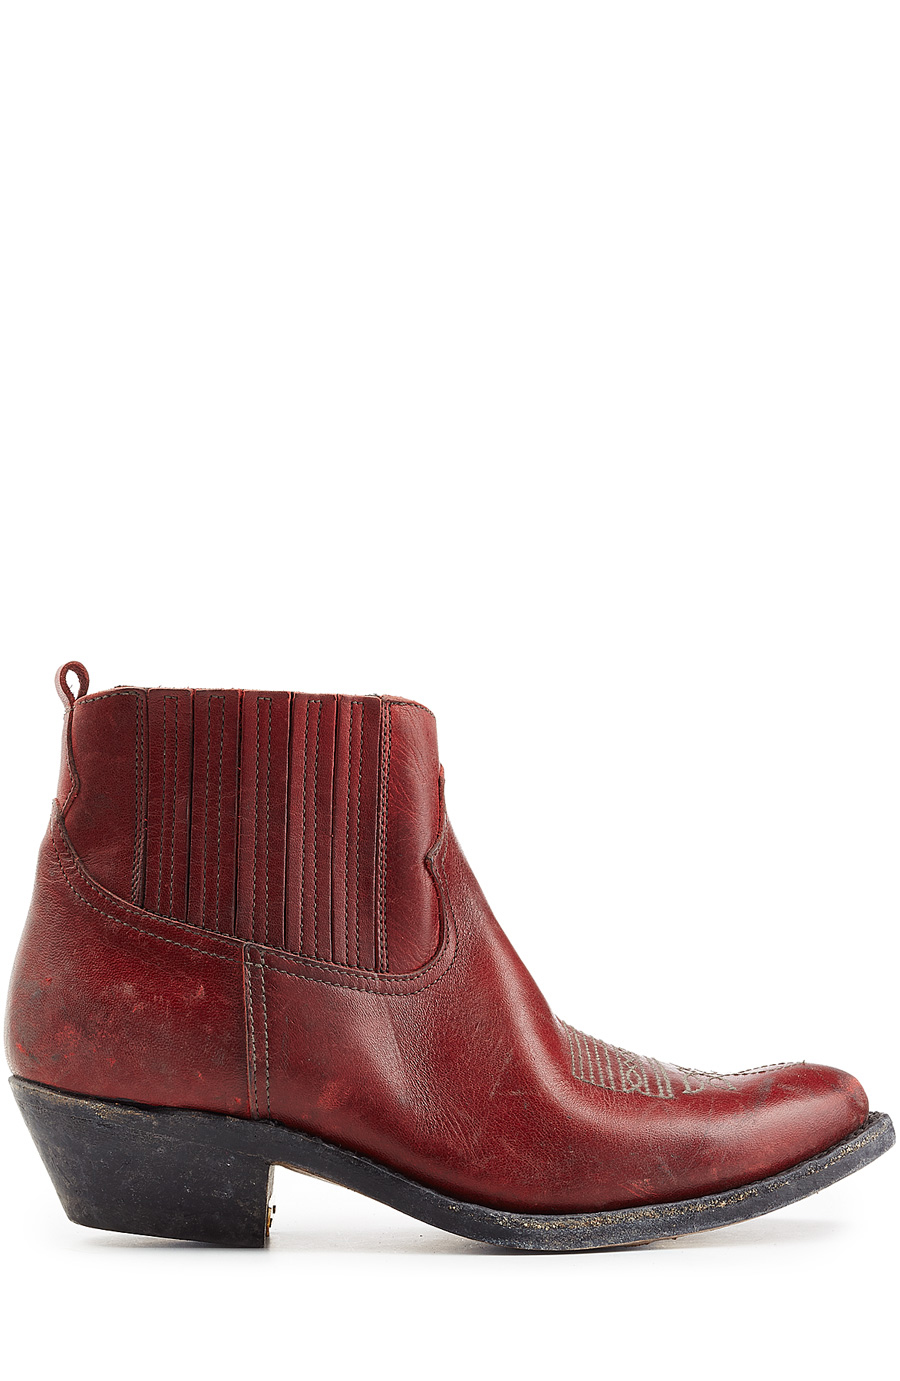 GOLDEN GOOSE Brielle Leather Ankle Boots in Red | ModeSens